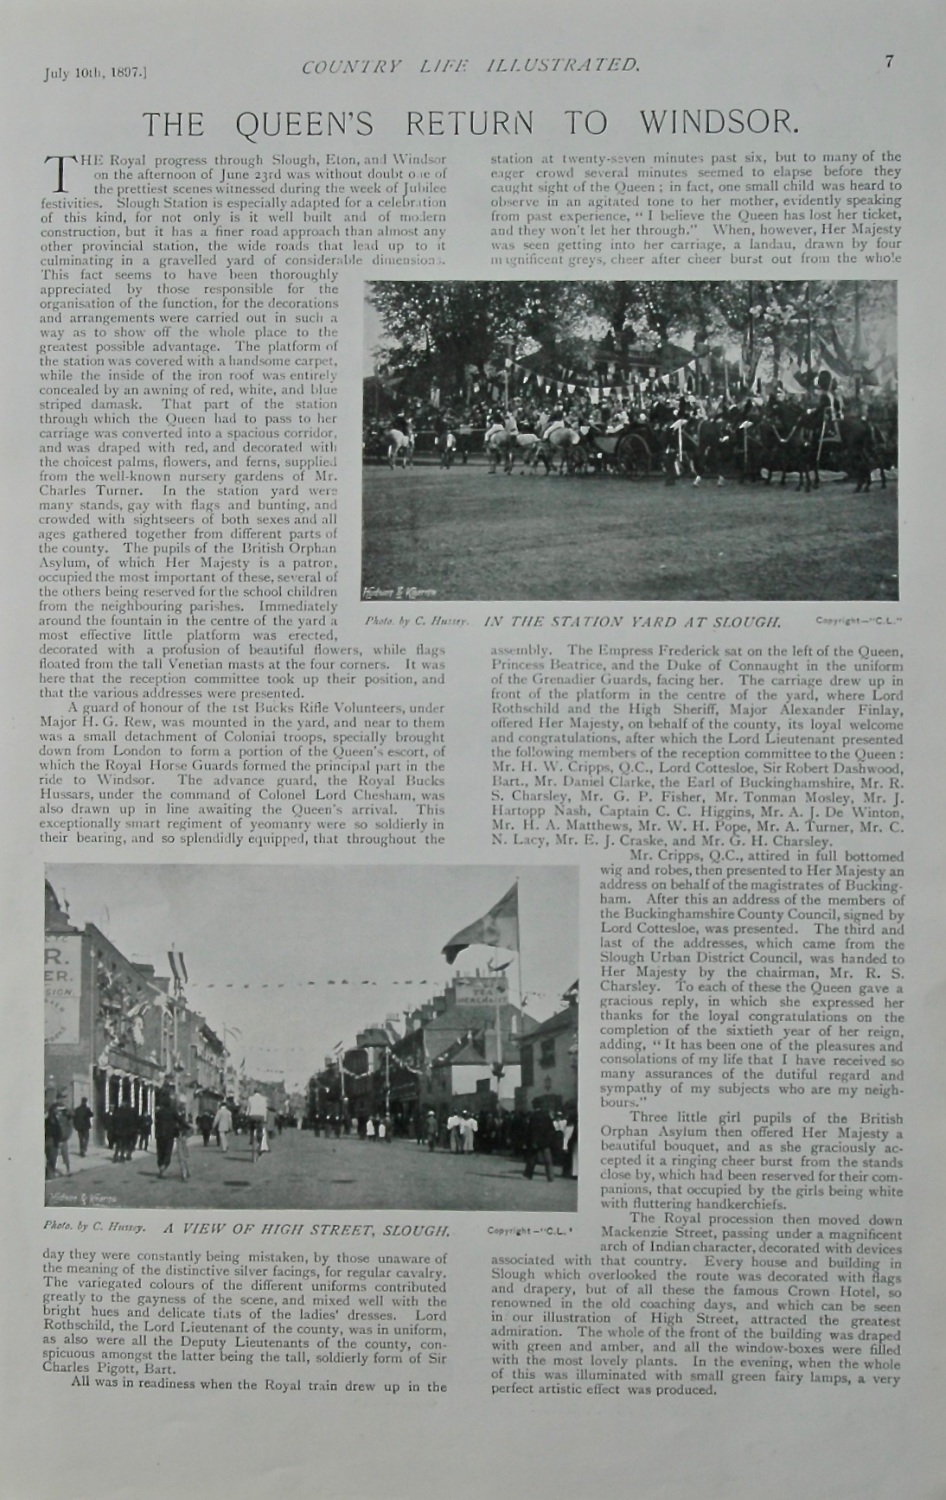 Original pages from Country Life, 1897